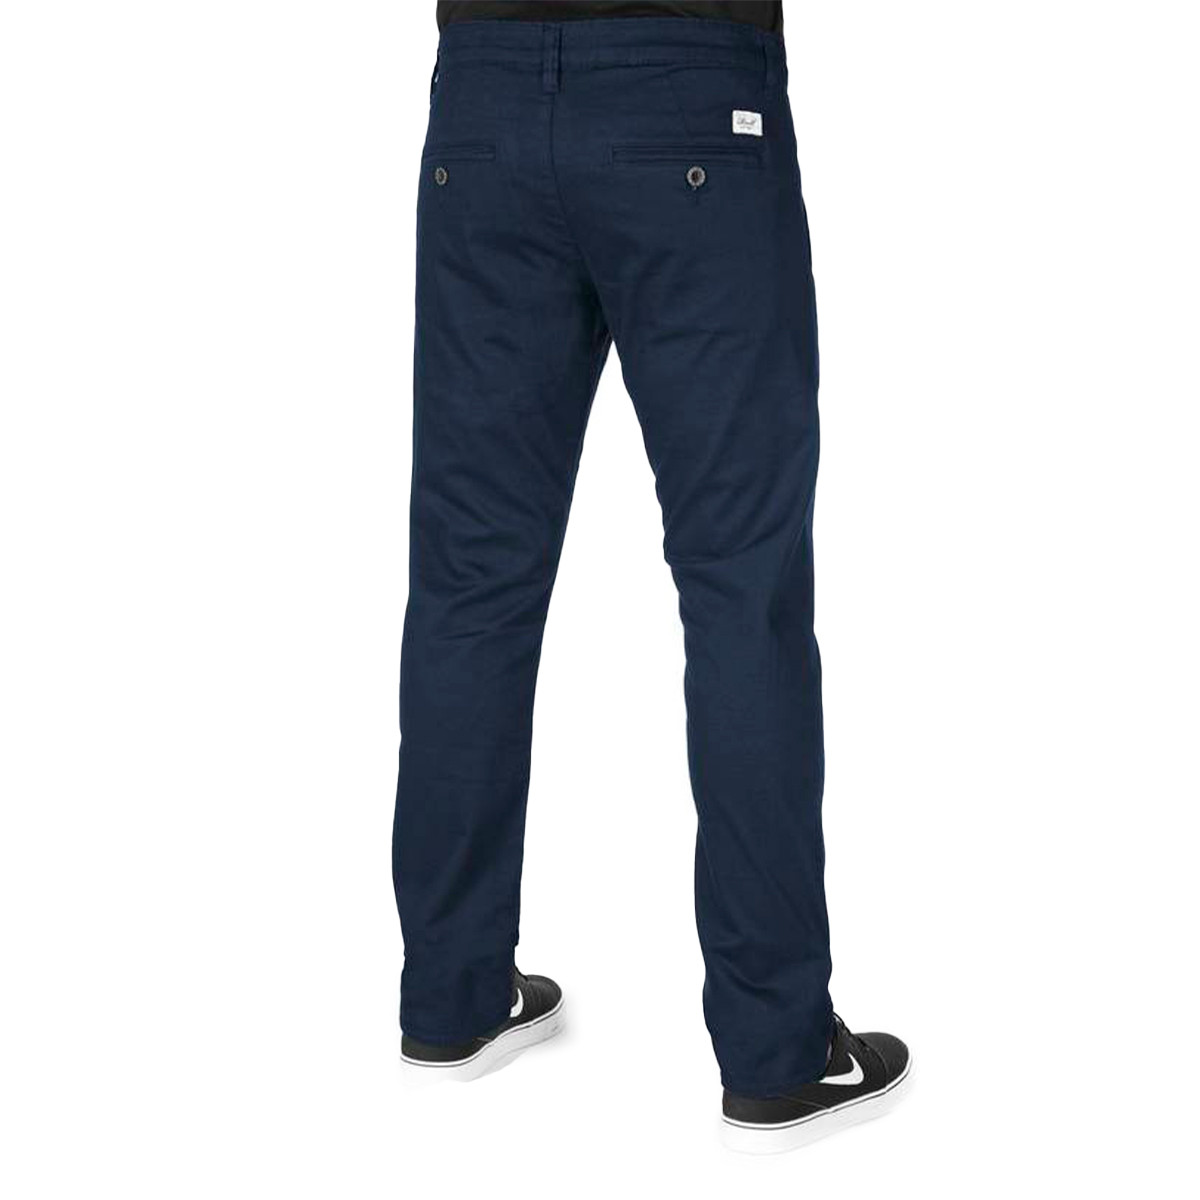 Reell Flex Tapered Chino Navy Long pants